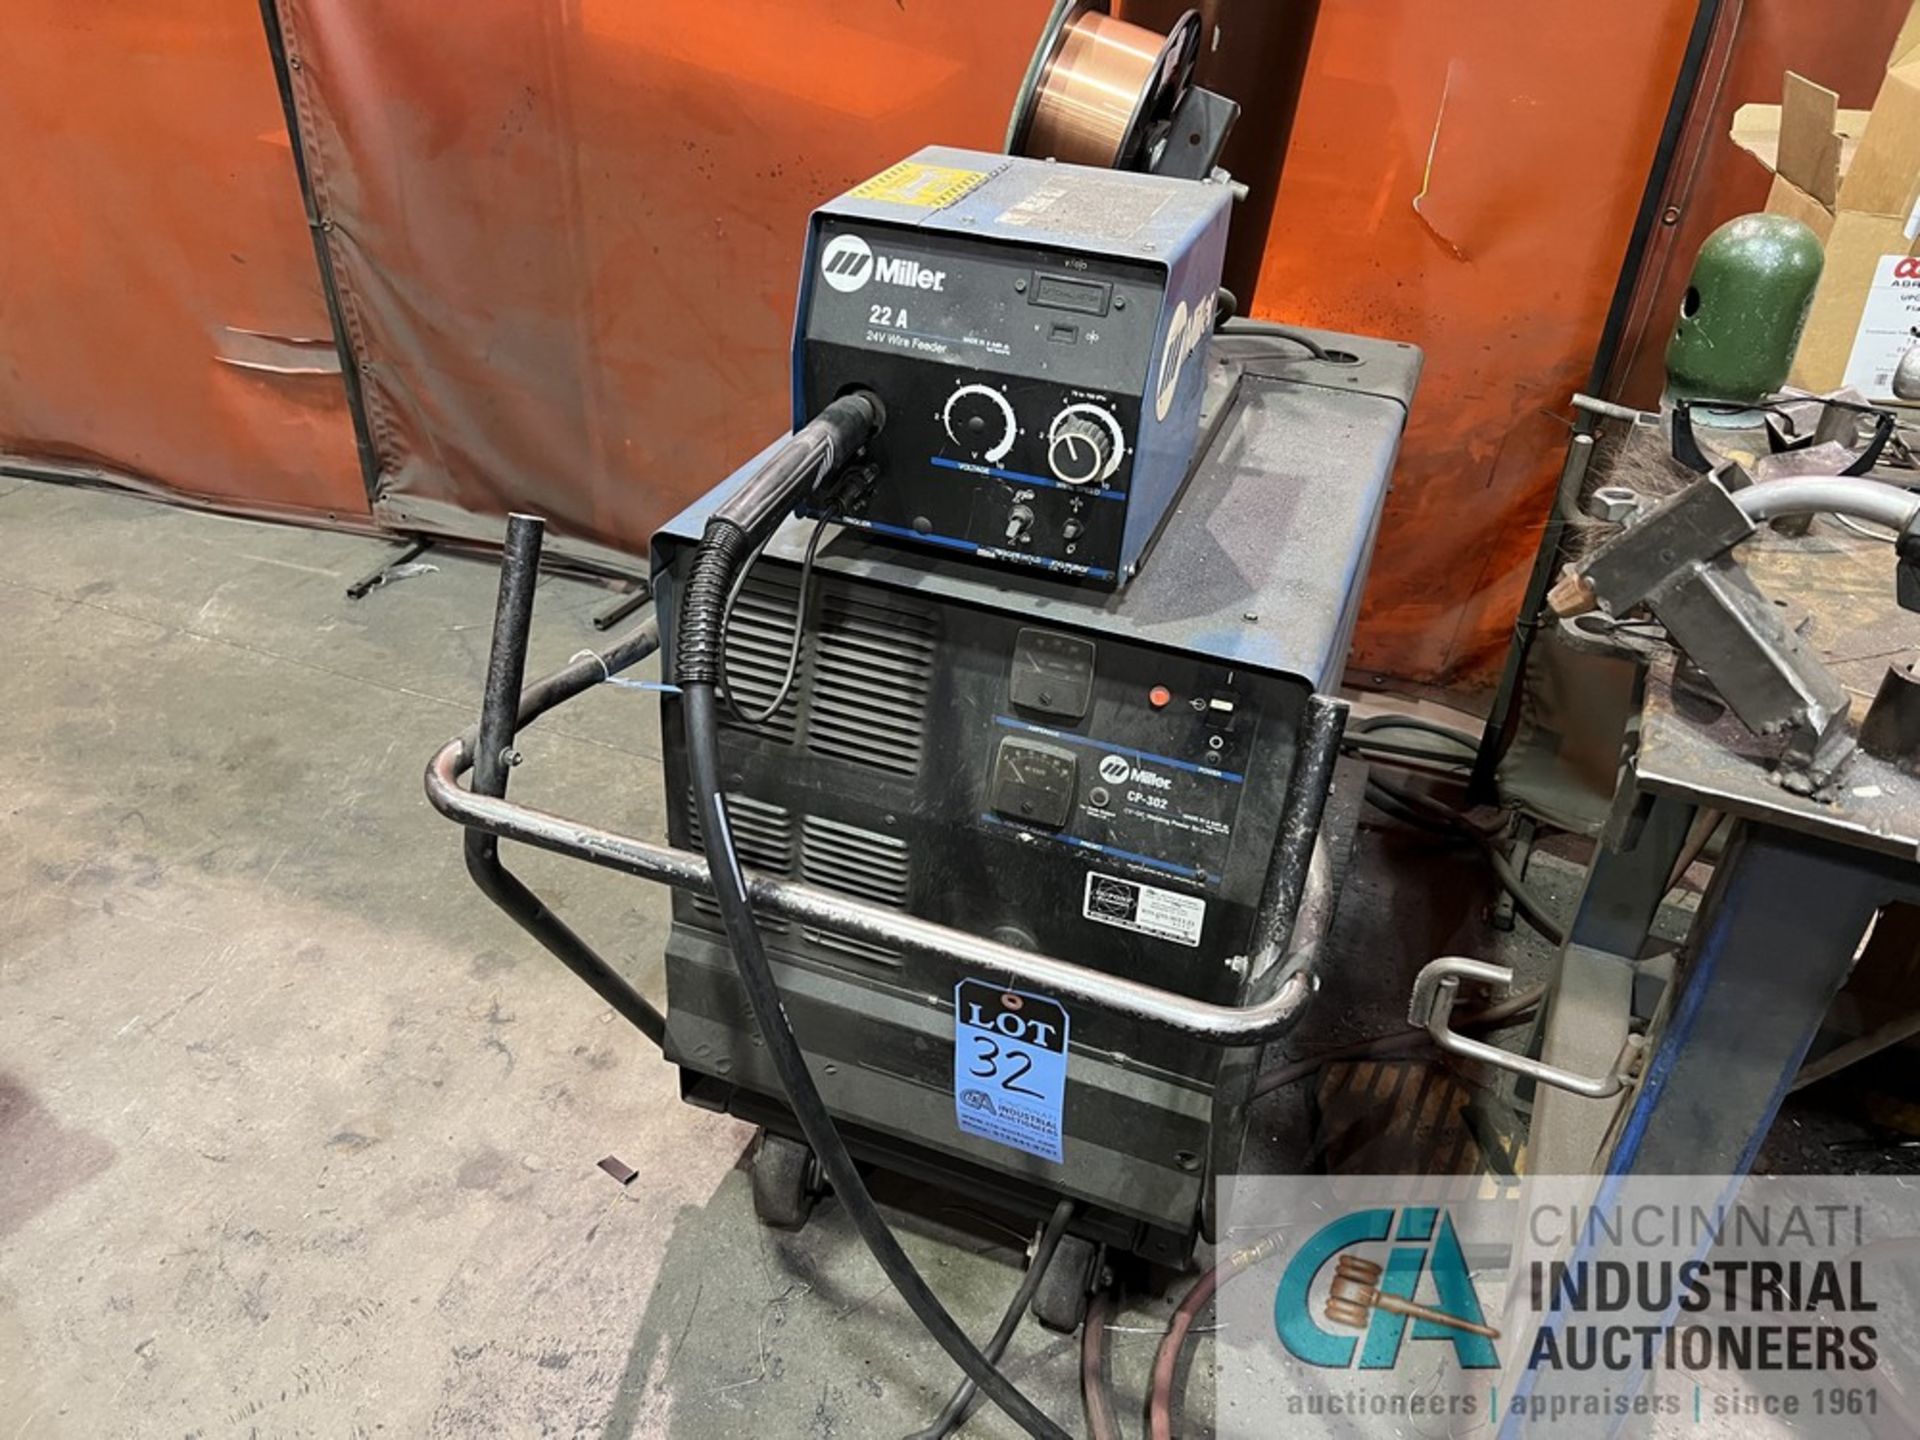 300-AMP MILLER MODEL CP-302 WELDER W/ 22A SERIES WIRE FEED - Image 2 of 5